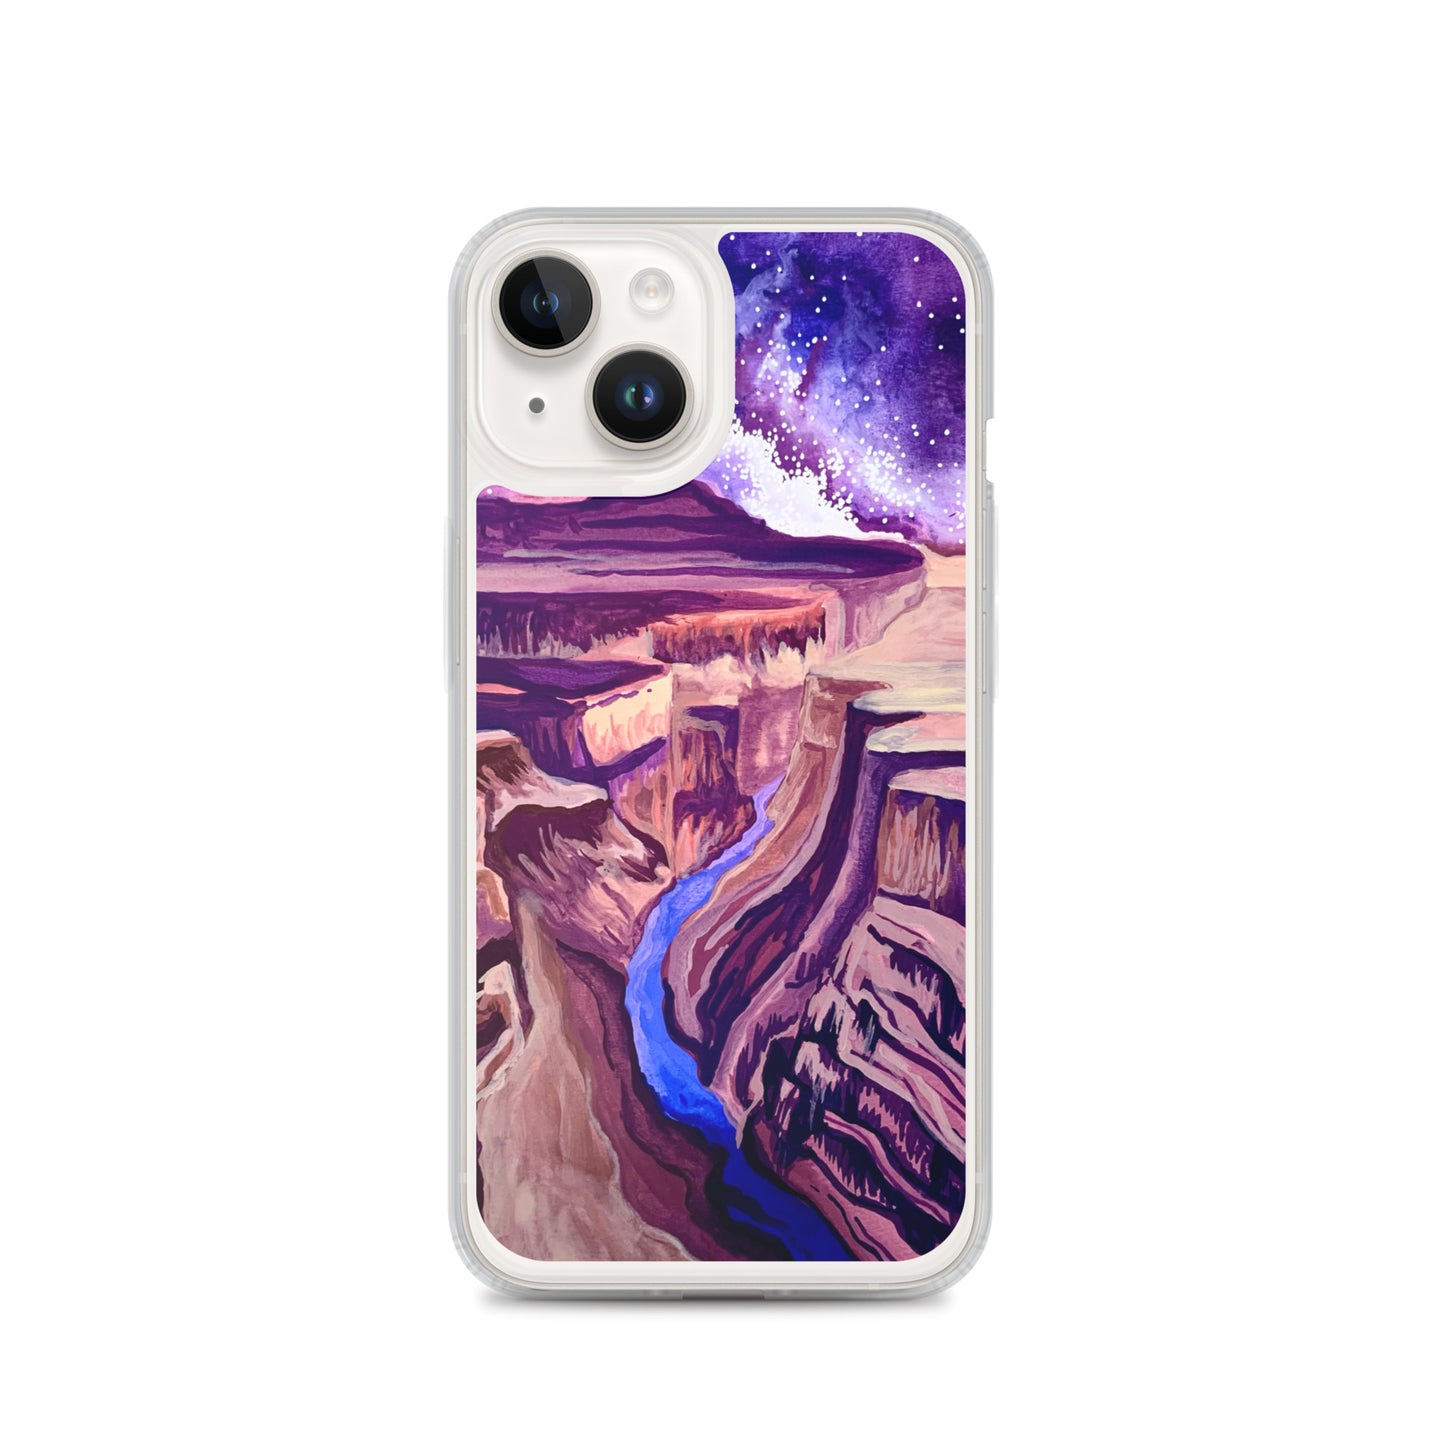 Grand Canyon National Park iPhone Case